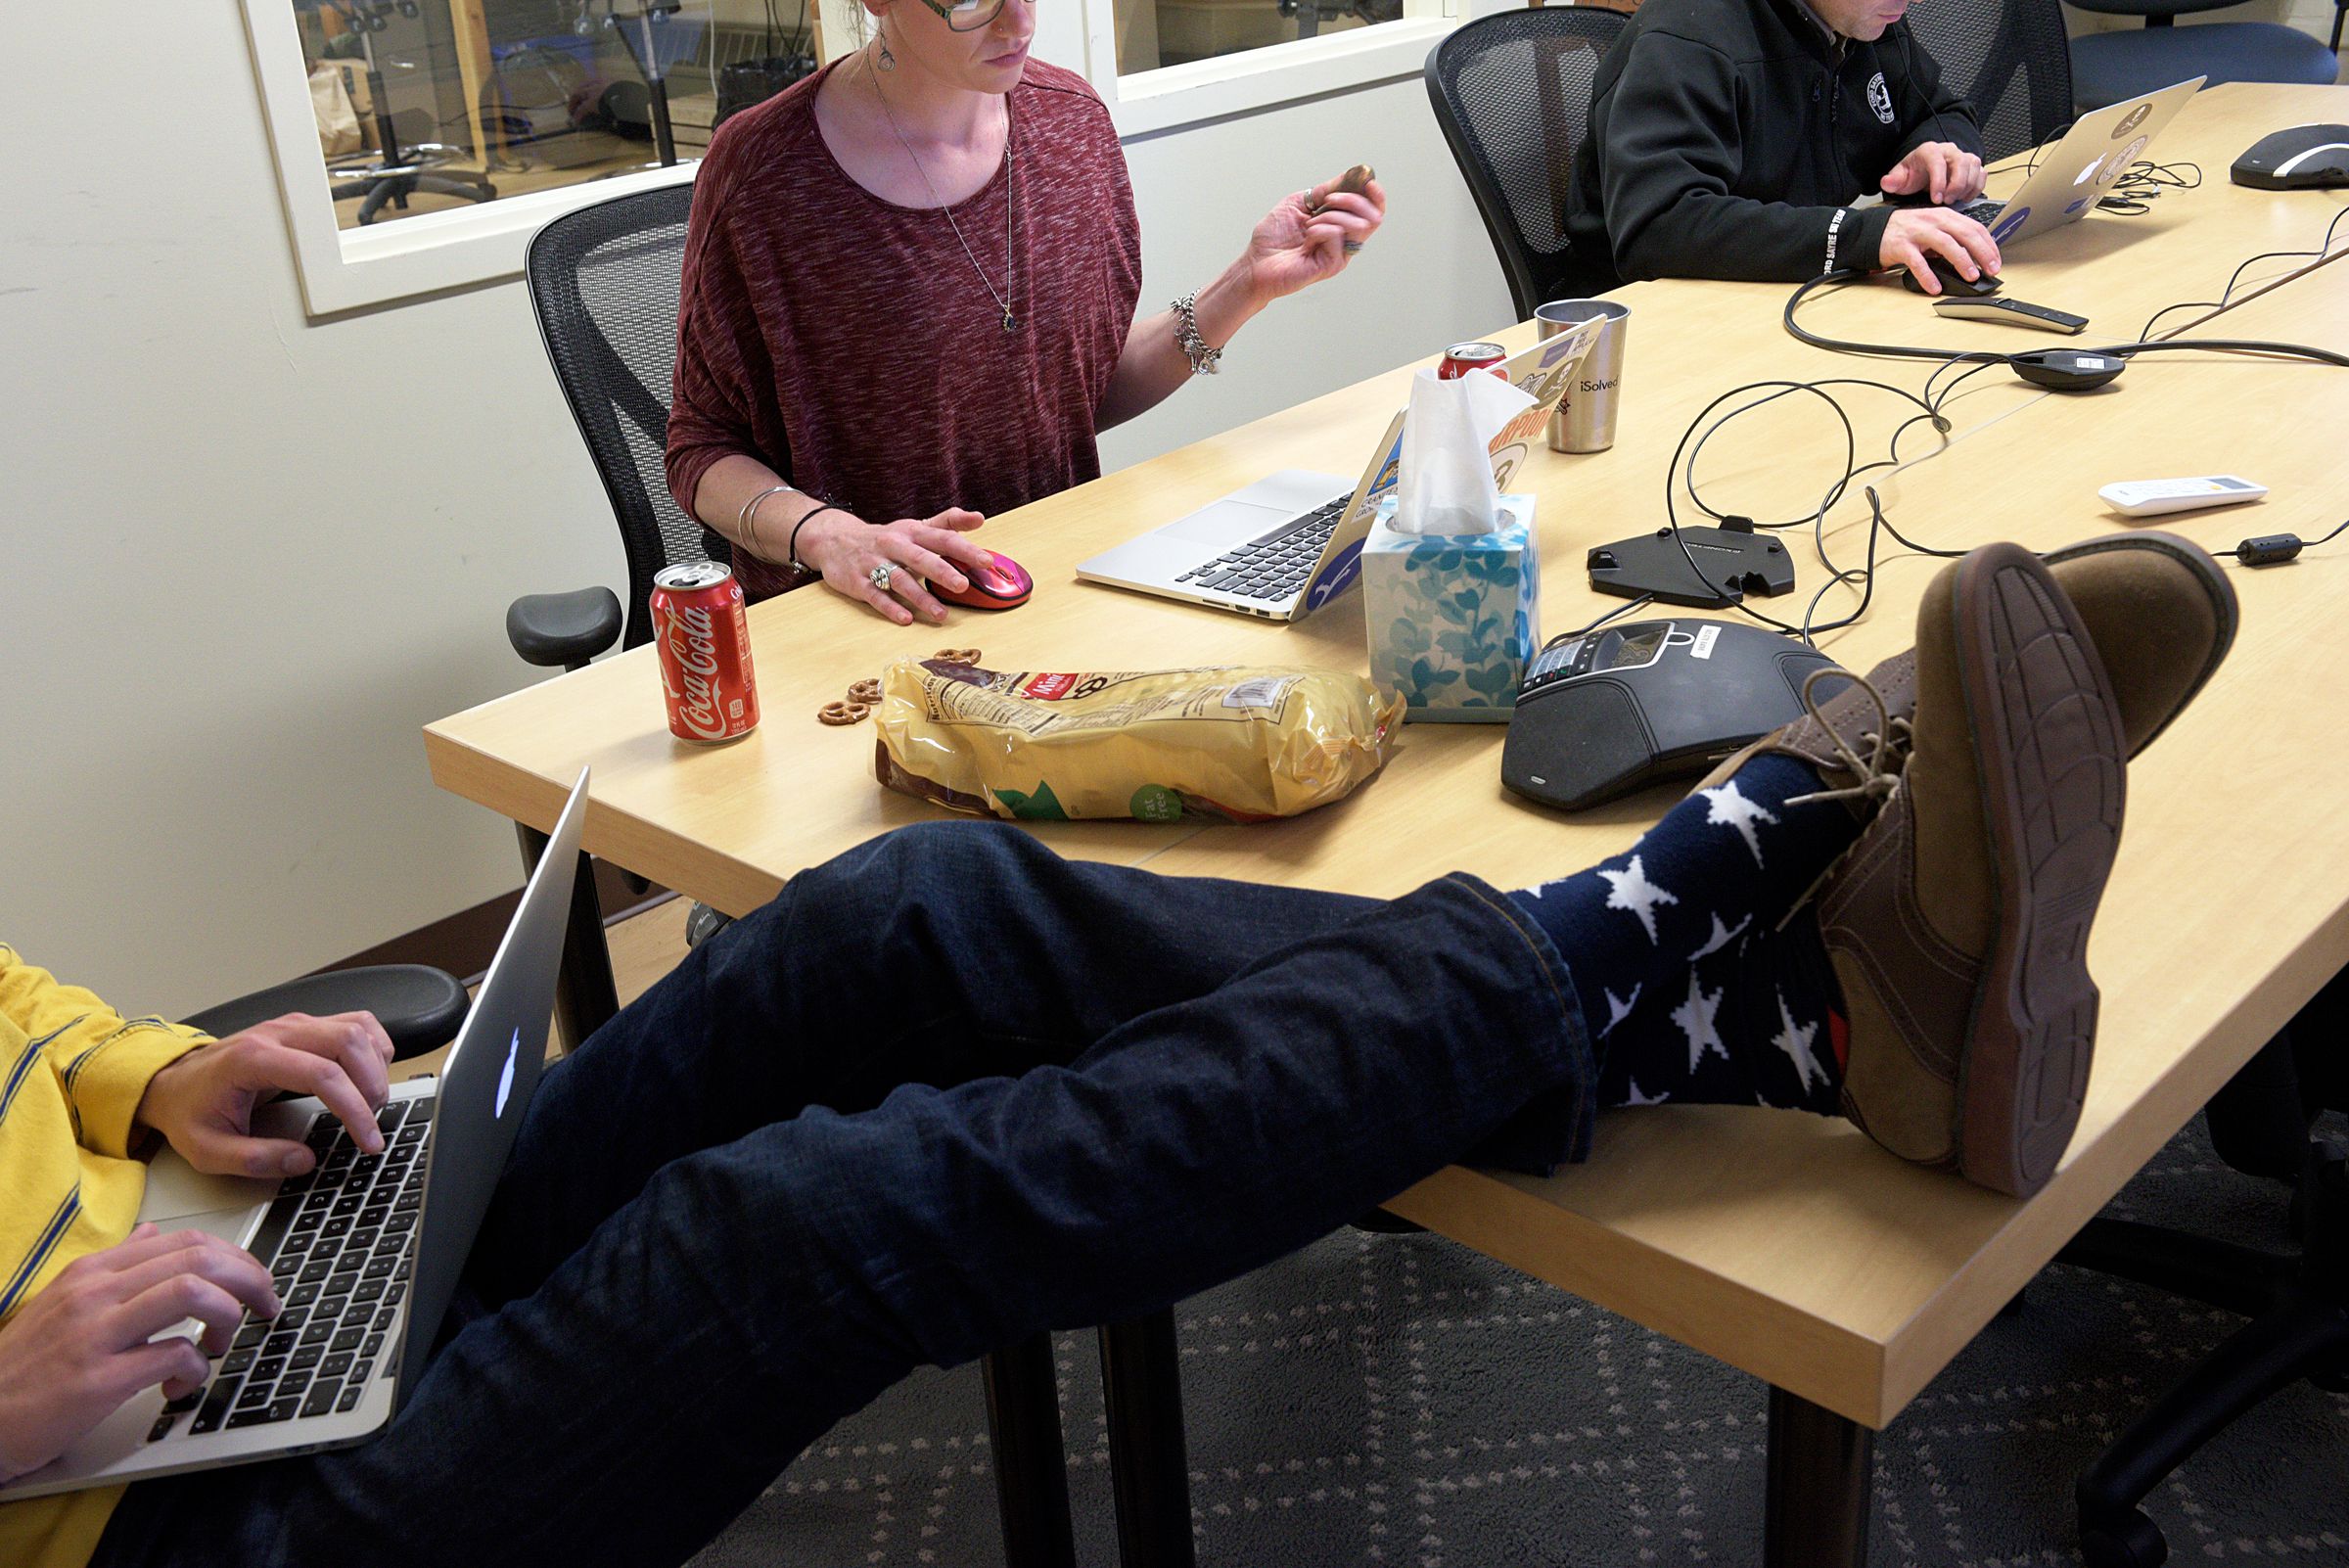 Product manager, Josh Goodrich, left, kicks up his feet while working with account manager Alison Bowen, middle, and manager of publisher operations Brian Garfield, right, at Appcast in Lebanon, N.H., Thursday, October 27, 2016. Appcast serves as a digital medium between large employers and publishers of job ads, Thursday October 27, 2016. (Valley News - James M. Patterson) Copyright Valley News. May not be reprinted or used online without permission. Send requests to permission@vnews.com.